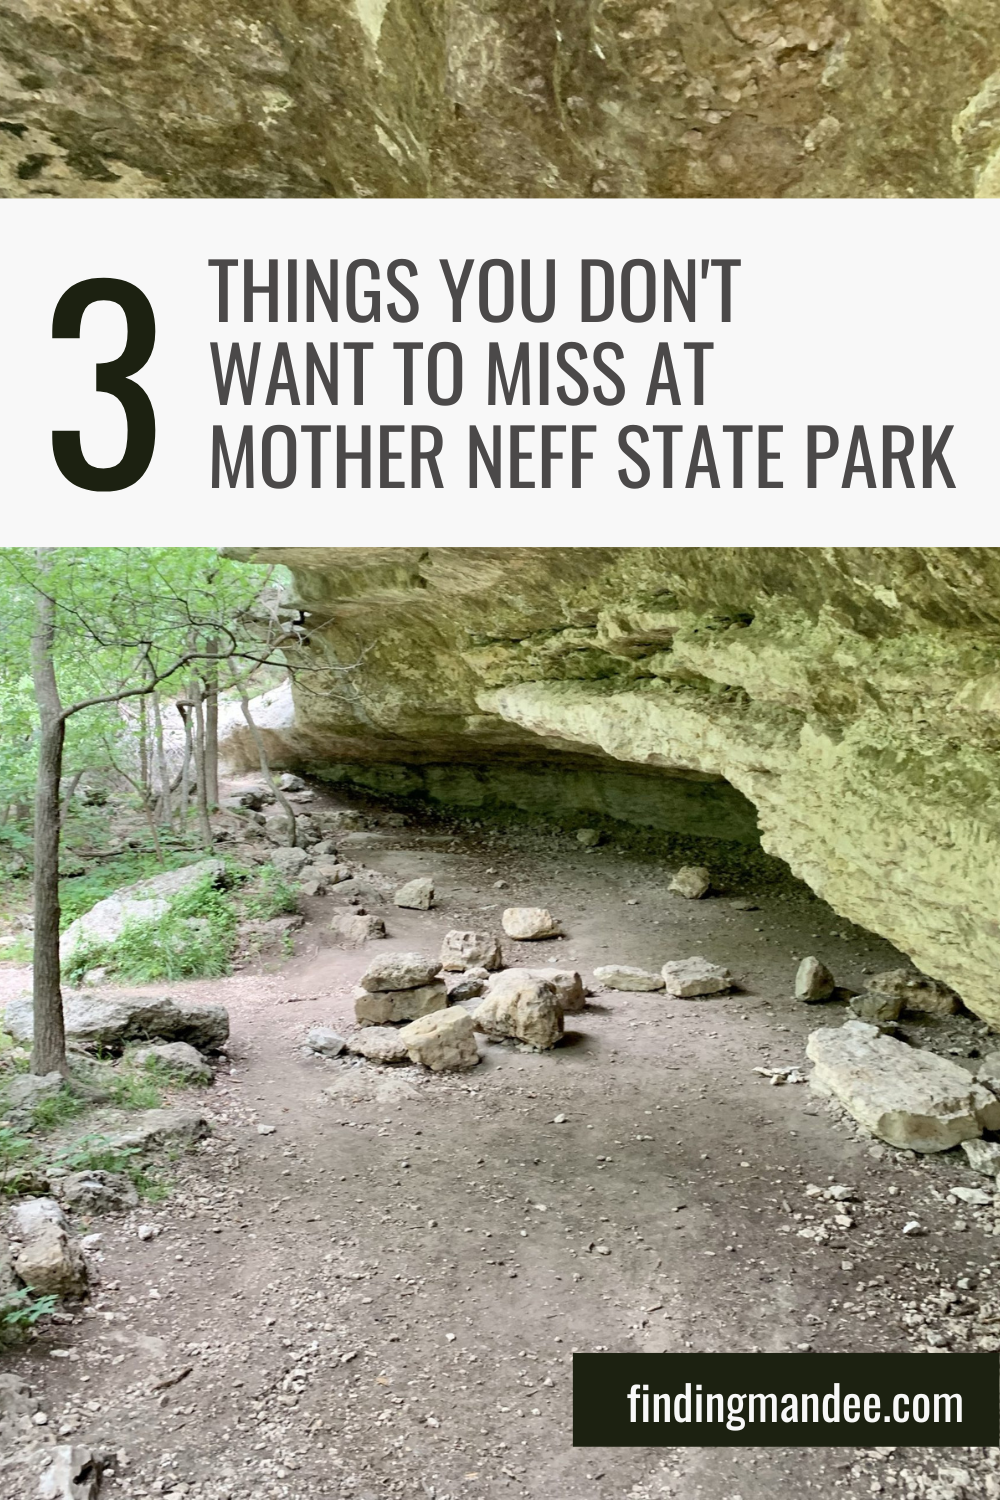 3 Things You Don't Want to Miss at Mother Neff State Park | Finding Mandee